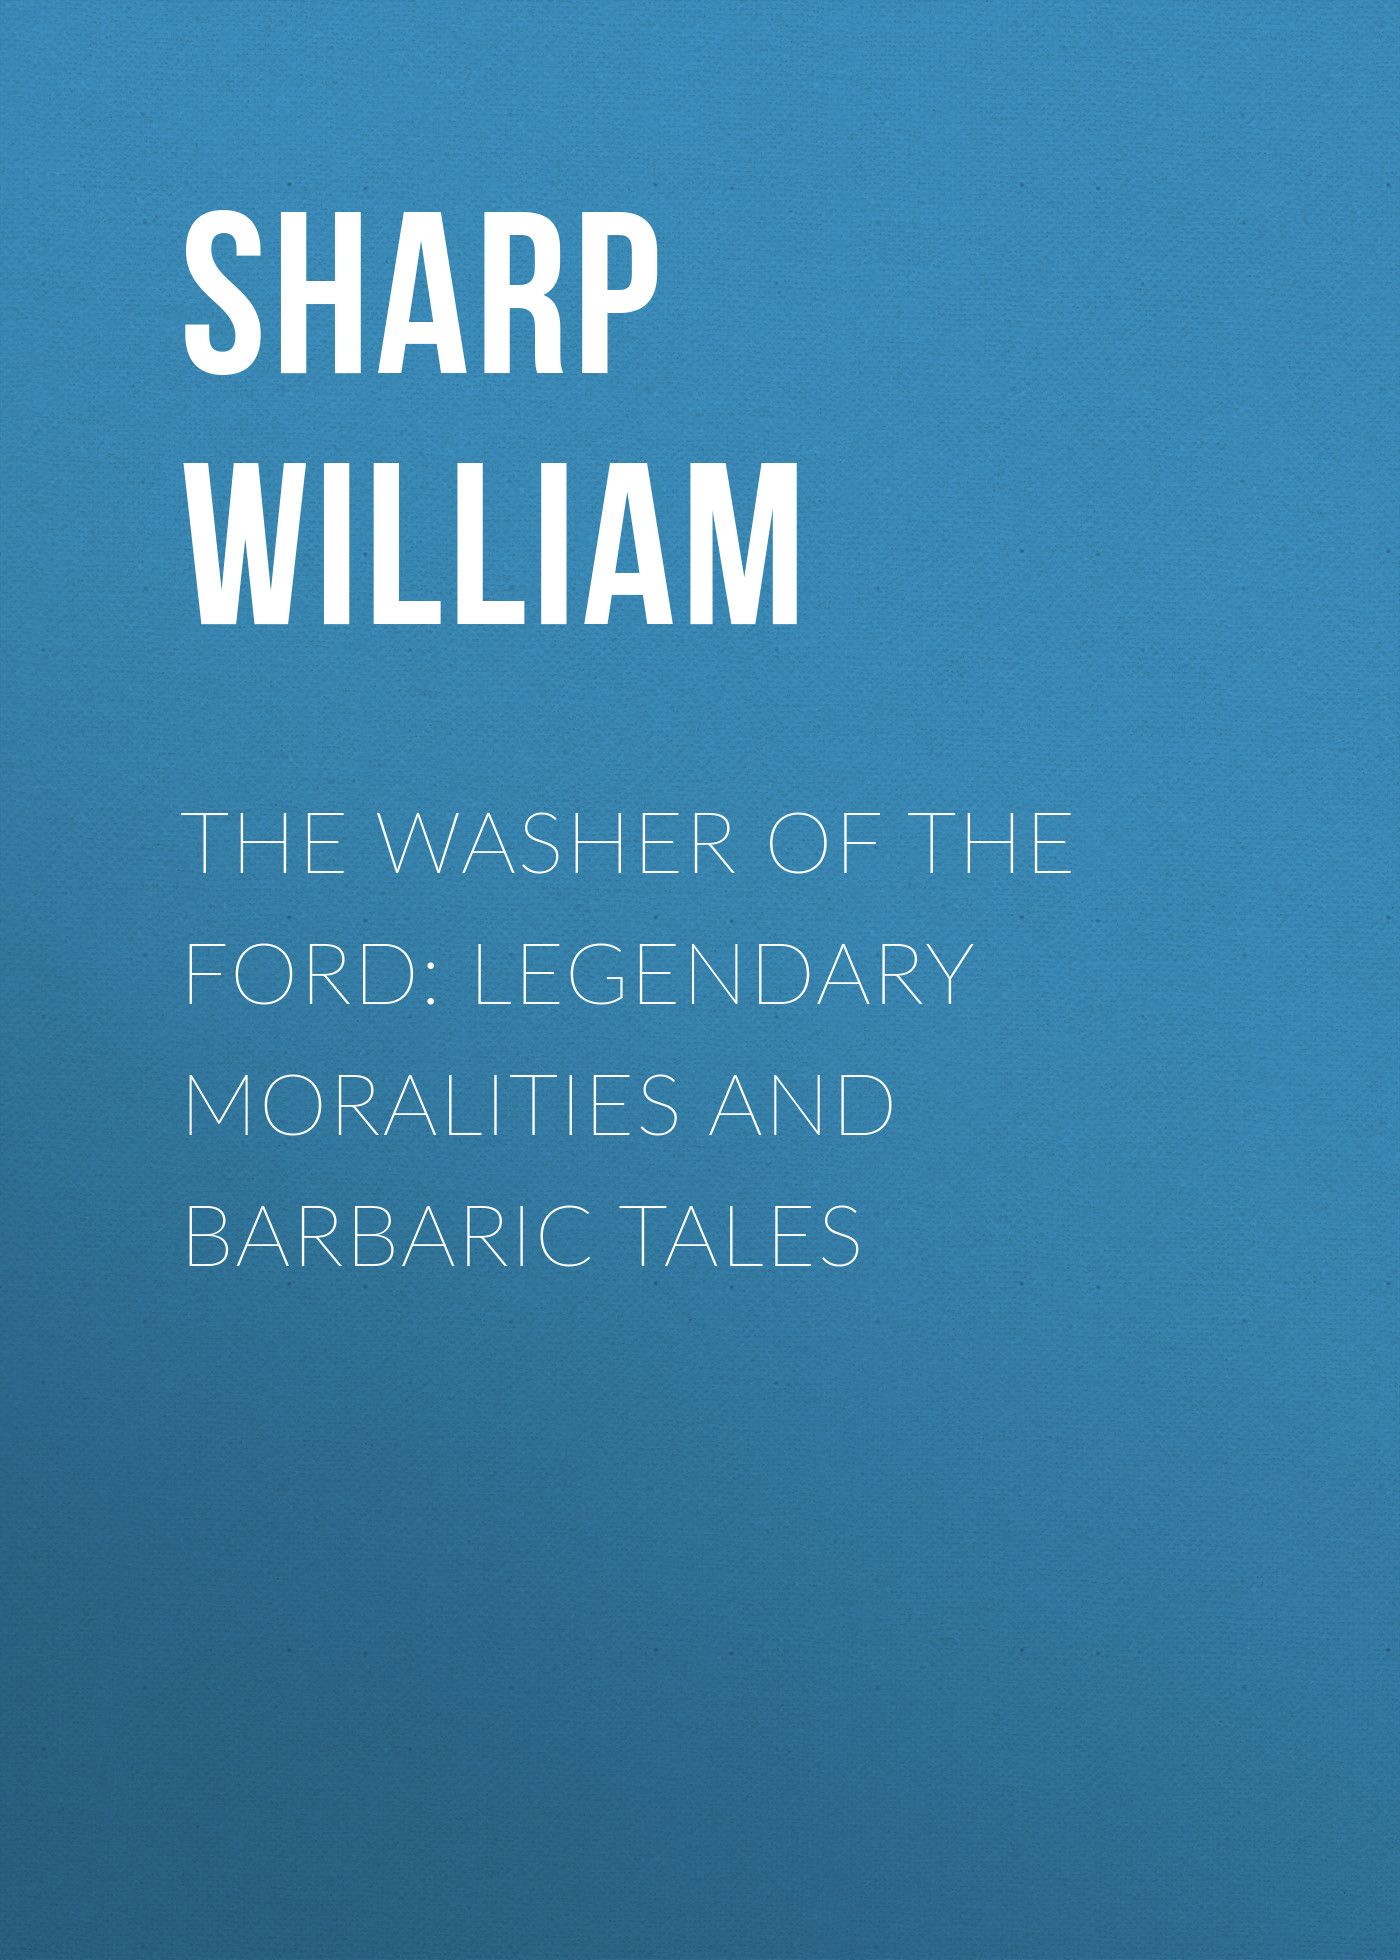 Sharp William The Washer of the Ford: Legendary moralities and barbaric tales